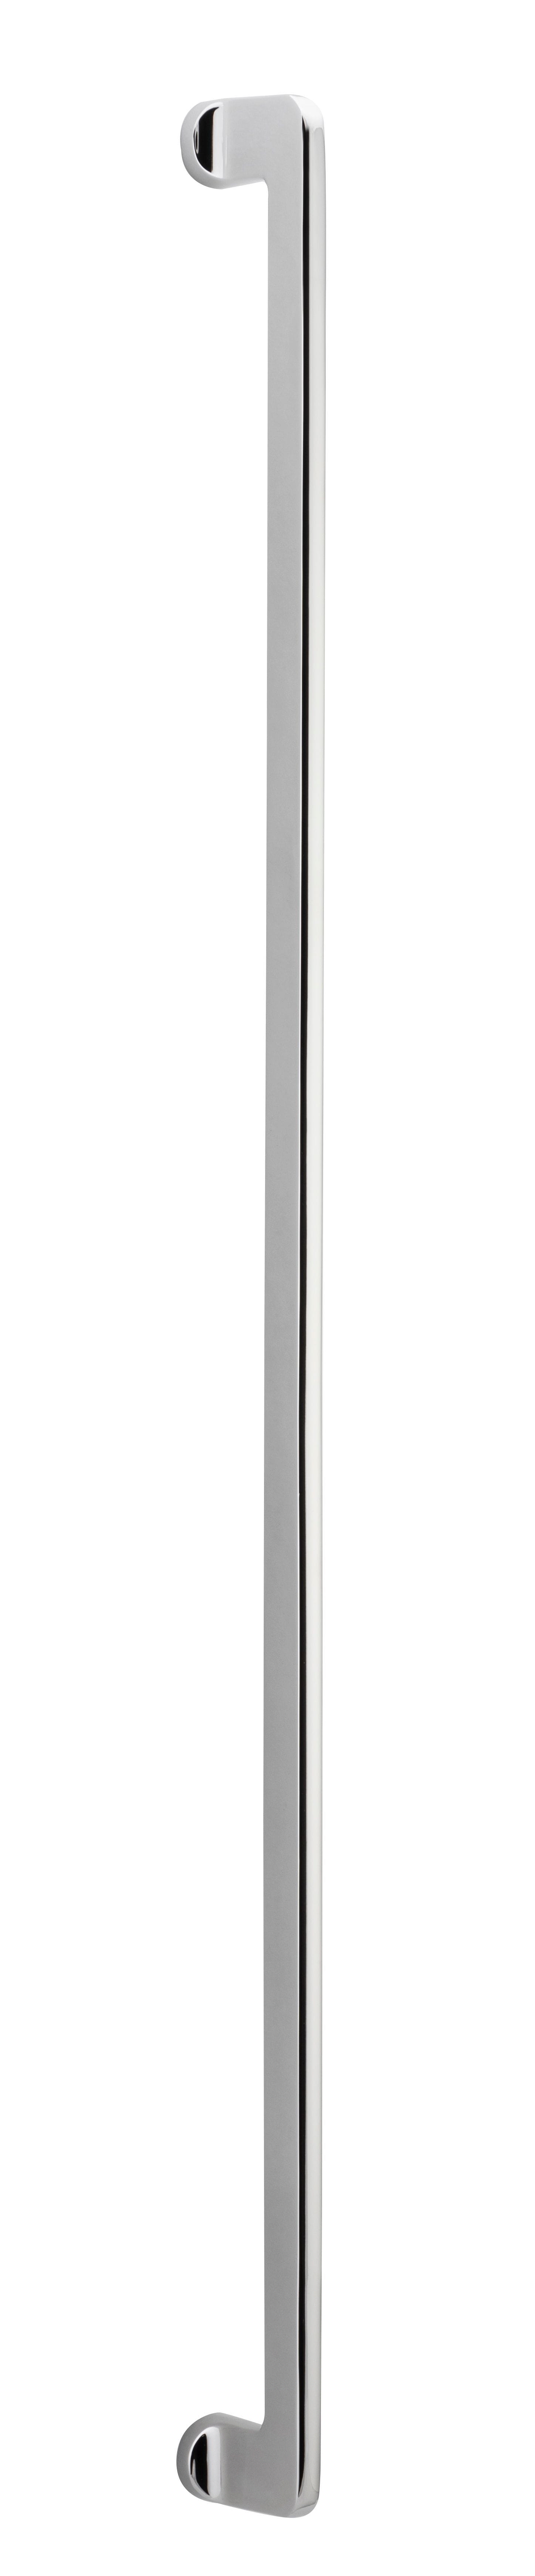 Baltimore Pull Handle Polished Chrome 900mm